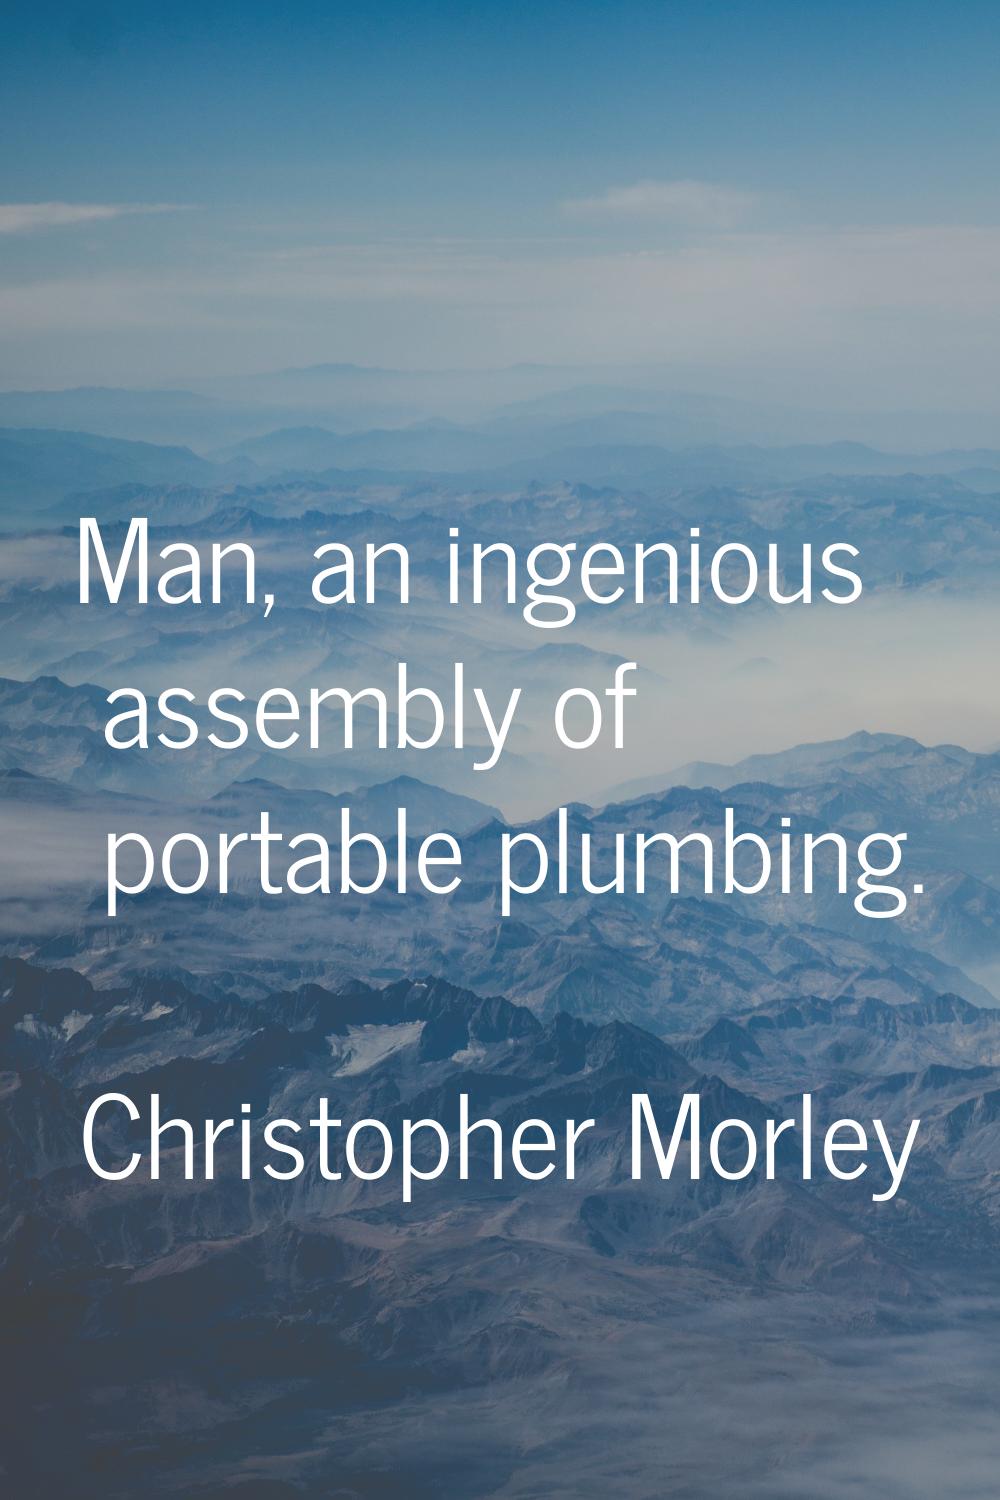 Man, an ingenious assembly of portable plumbing.